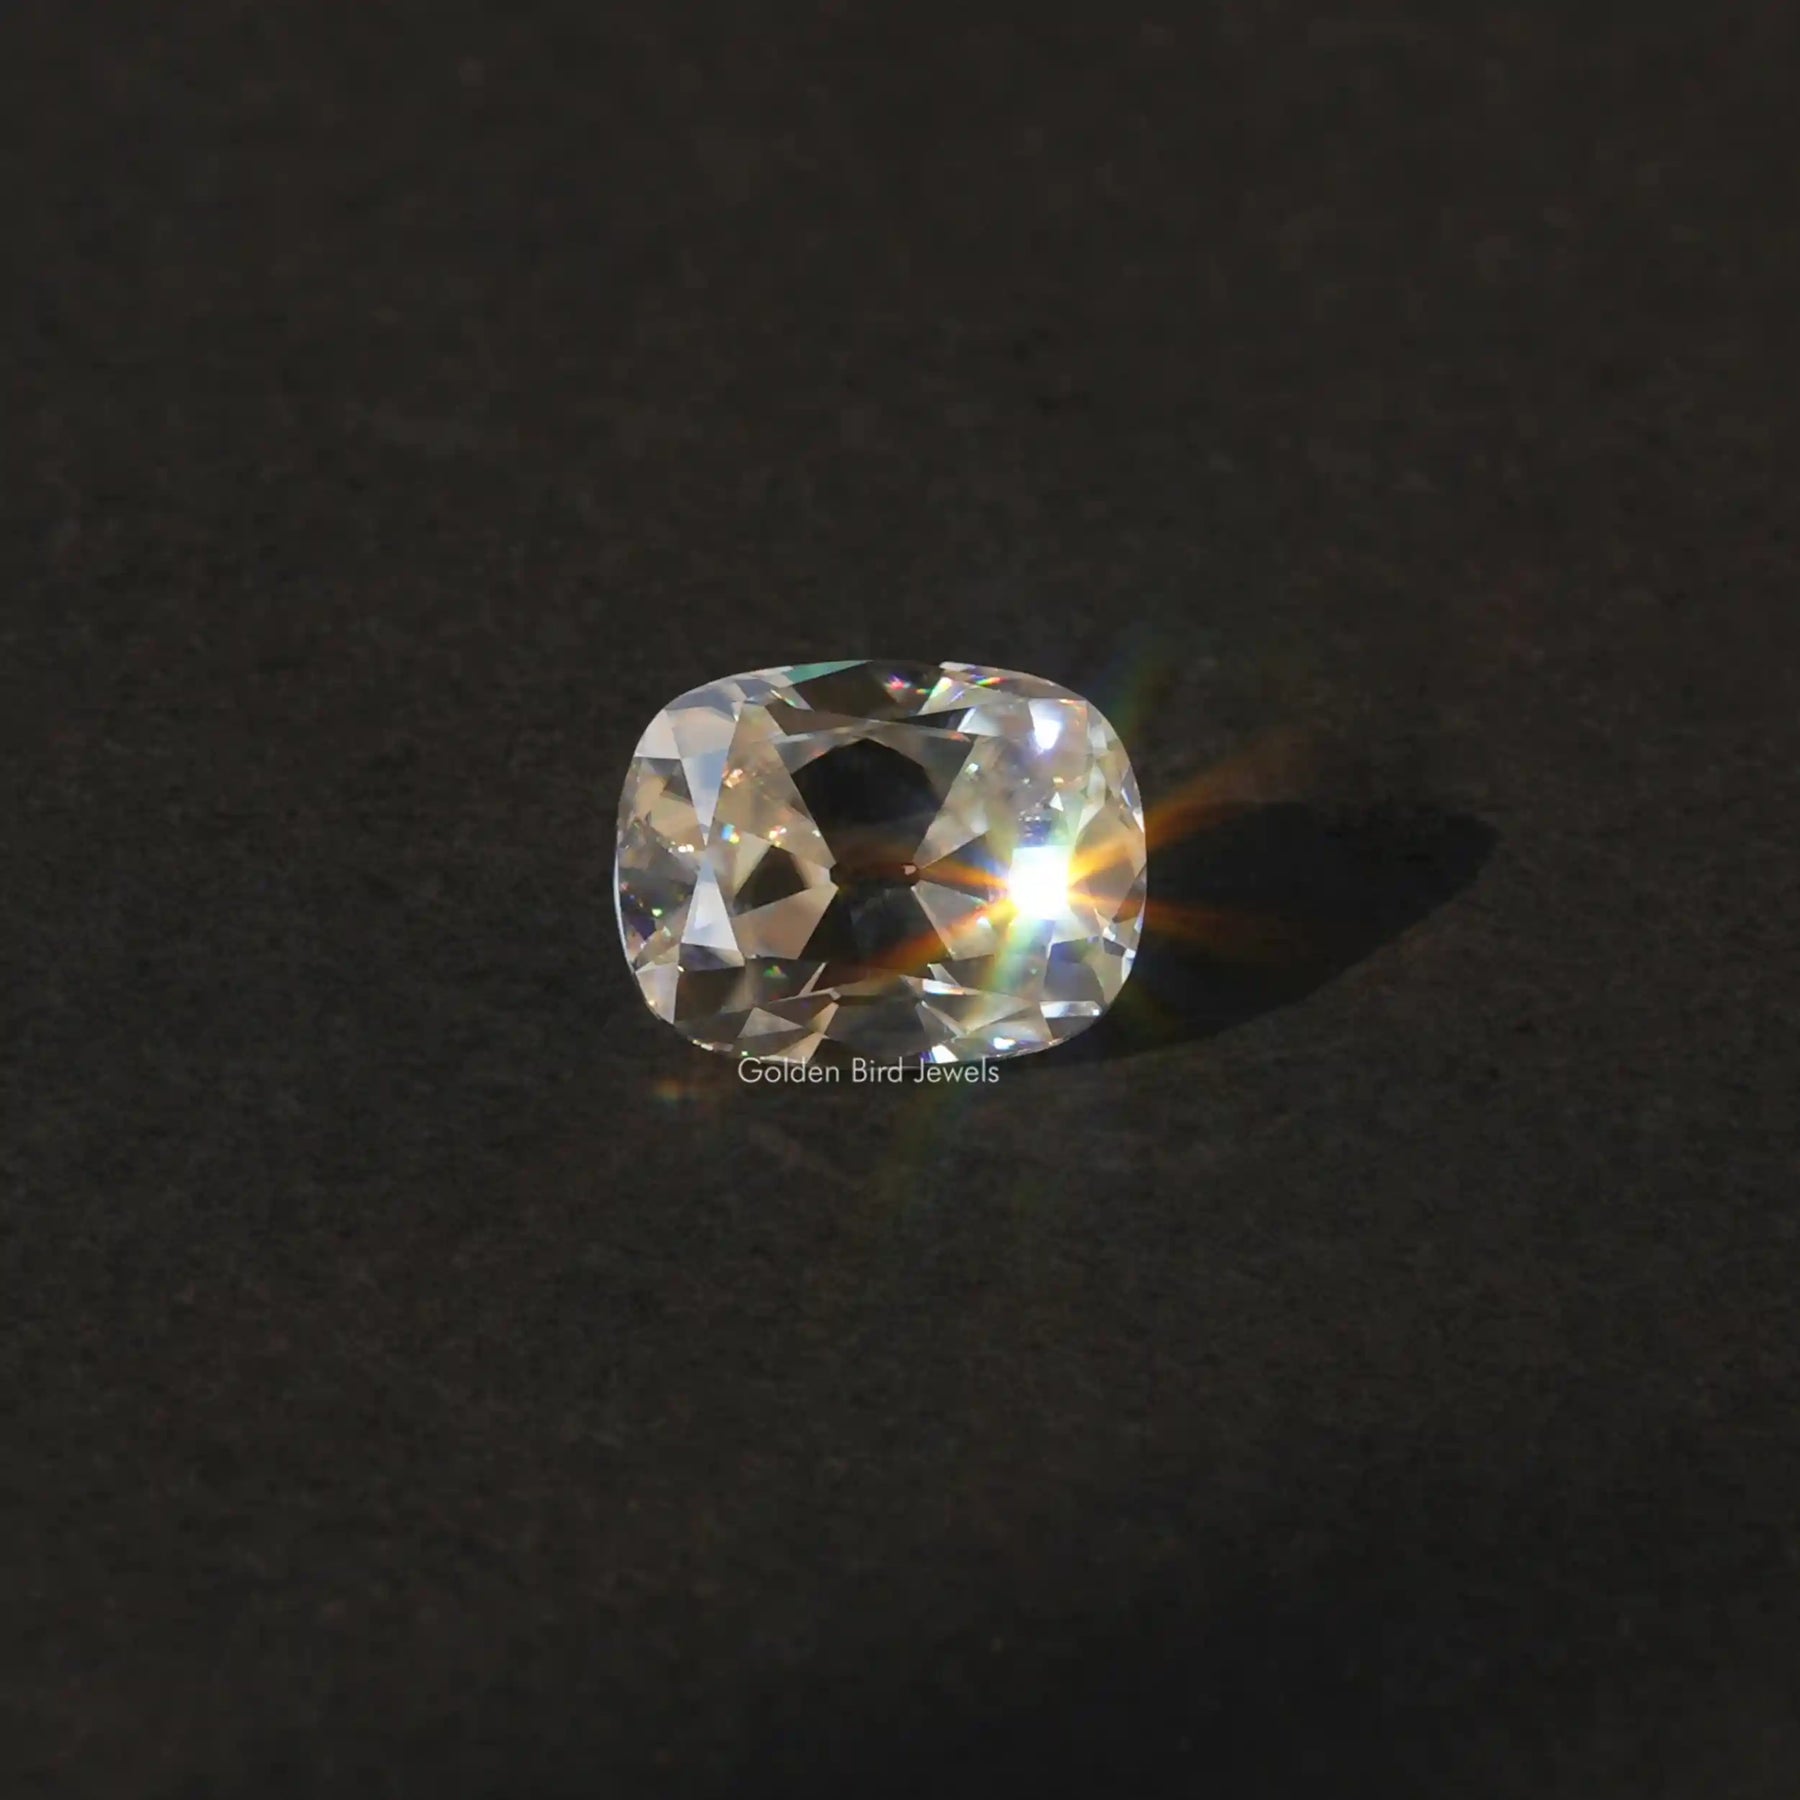 [Front view of old mine cushion cut loose stone made of near colorless]-[Golden Bird Jewels]